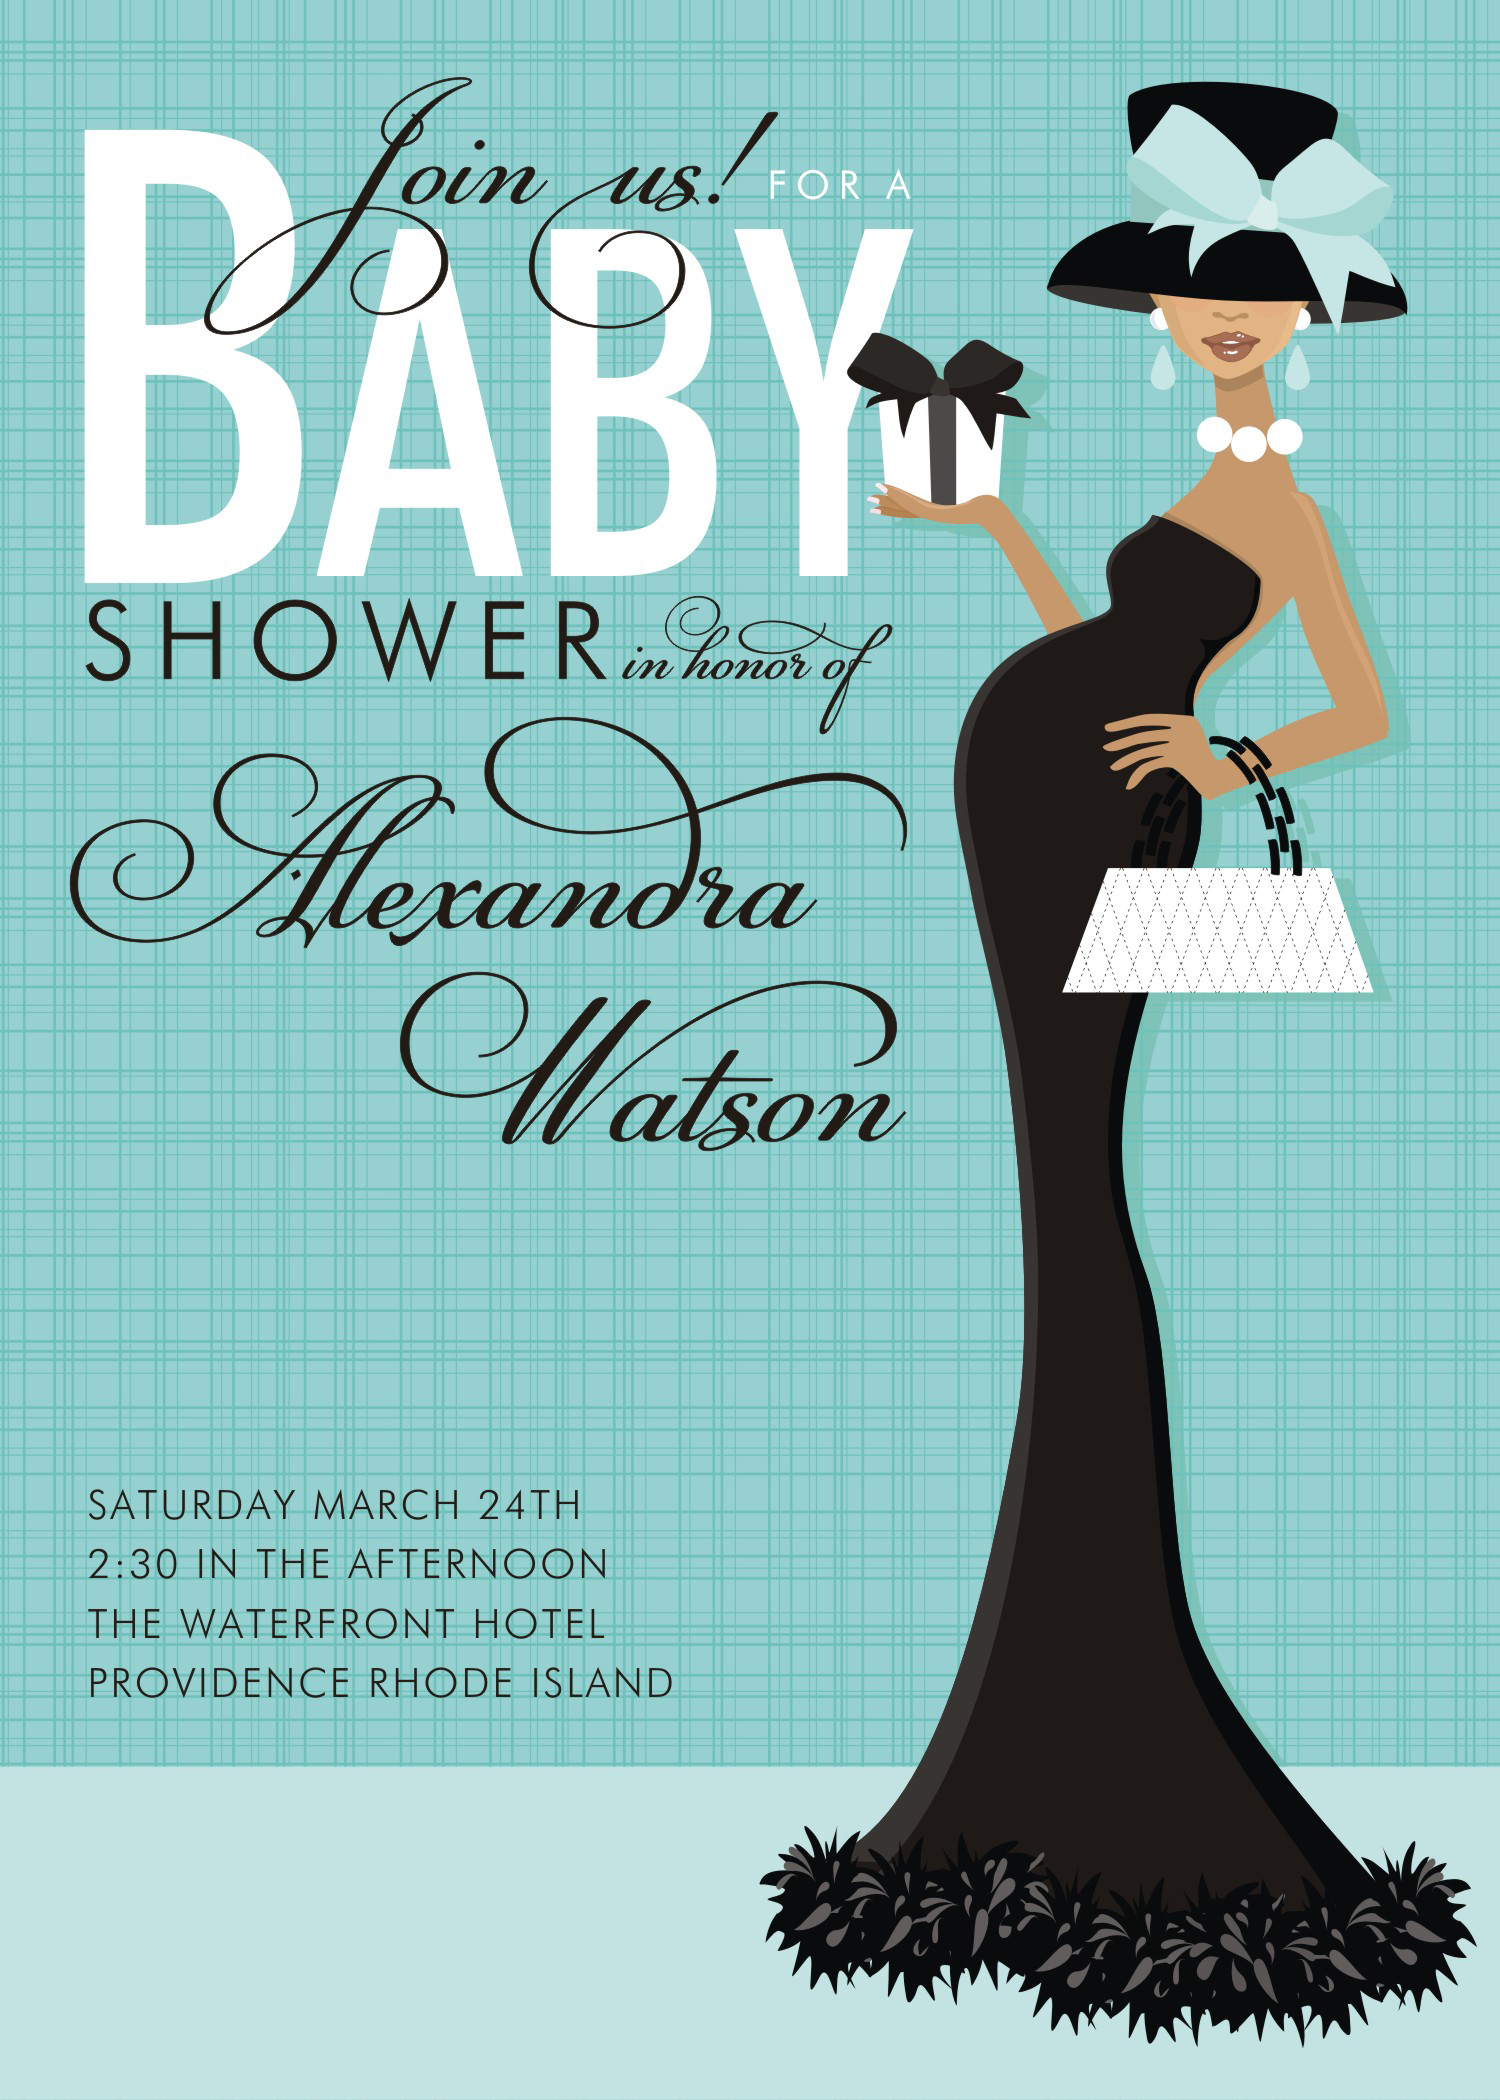 Full Size of Baby Shower:sturdy Baby Shower Invitation Template Image Concepts Baby Shower Invitation Template As Well As Baby Shower Host With Baby Shower Stuff Plus Baby Shower Para Niño Together With Diy Baby Shower Invitations